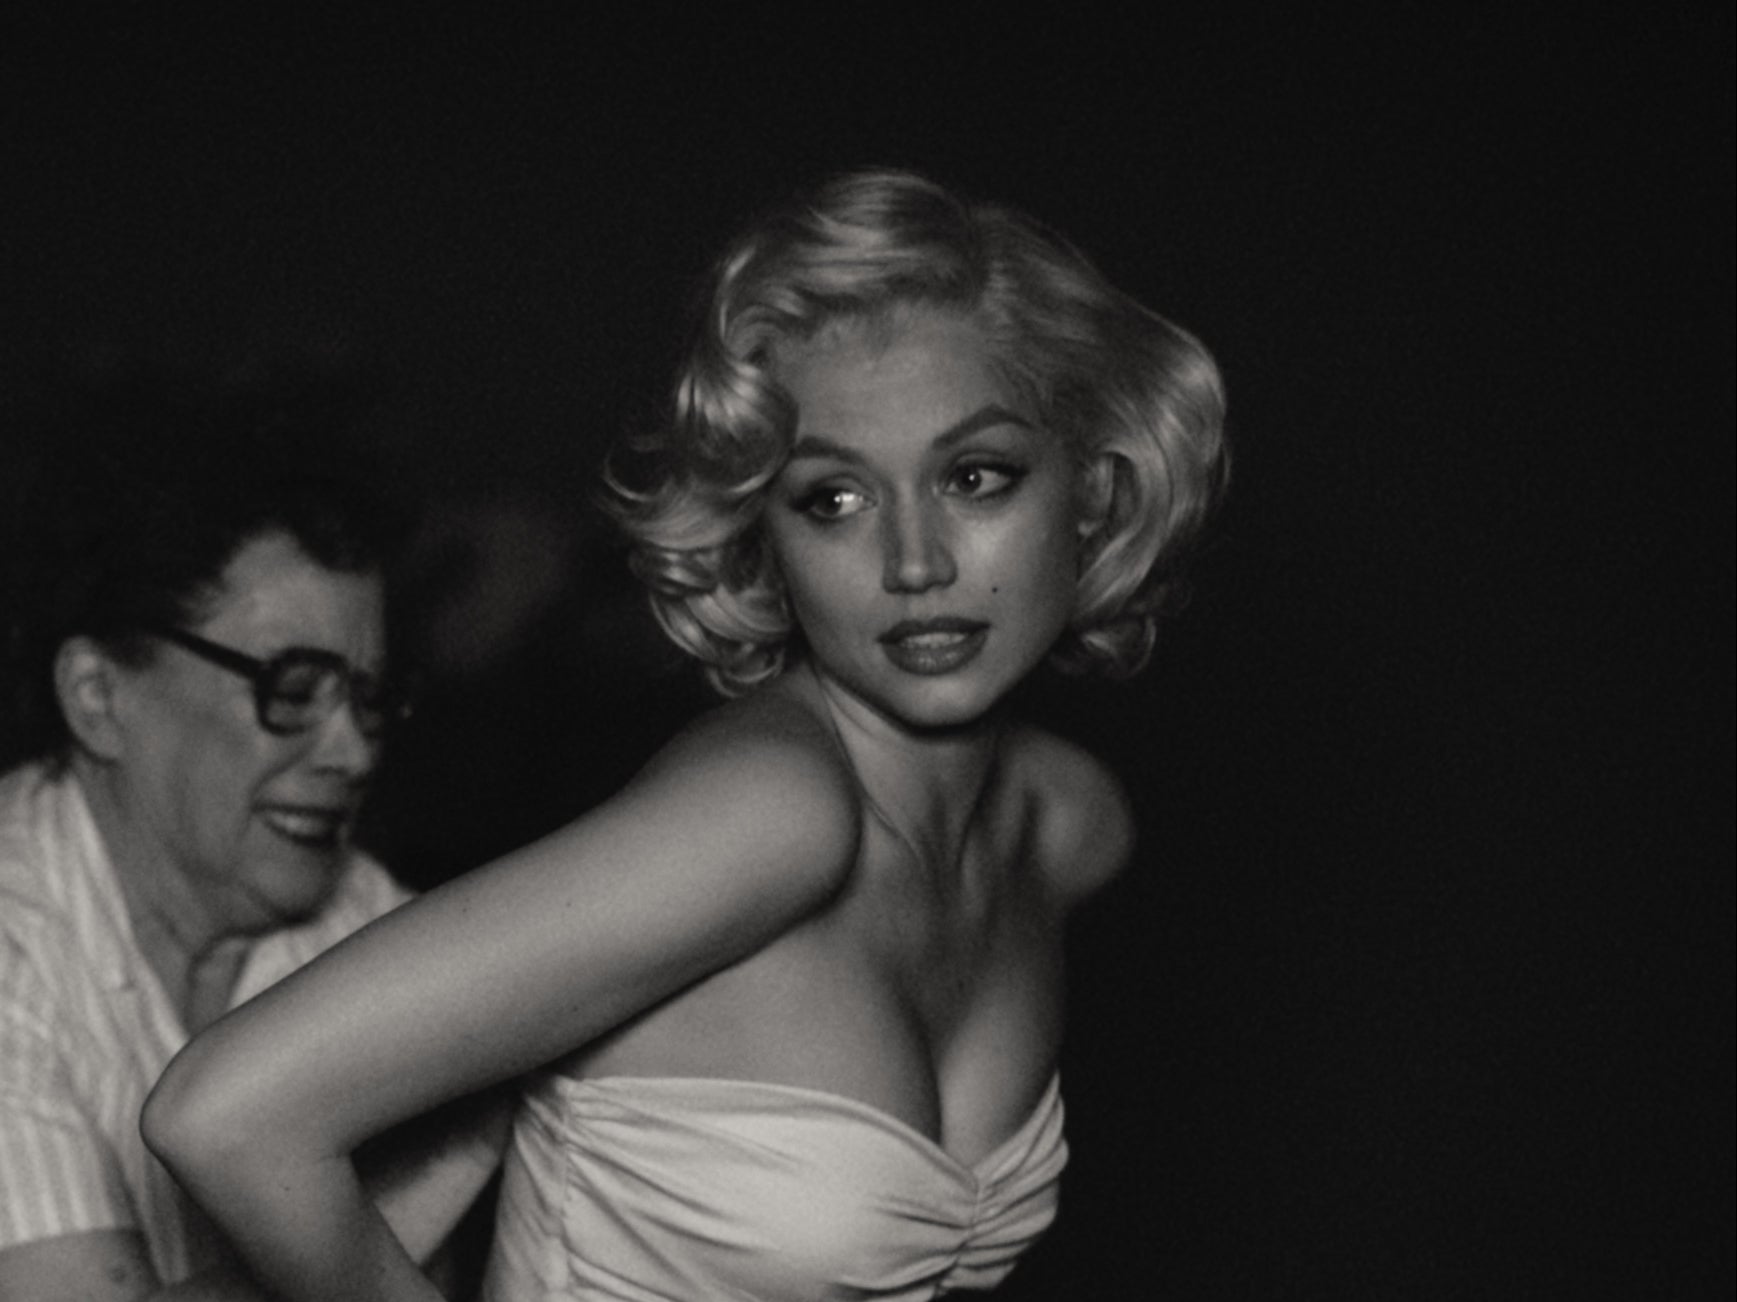 Blonde Marilyn Monroe estate responds to criticism of Netflix film starring Ana de Armas The Independent pic